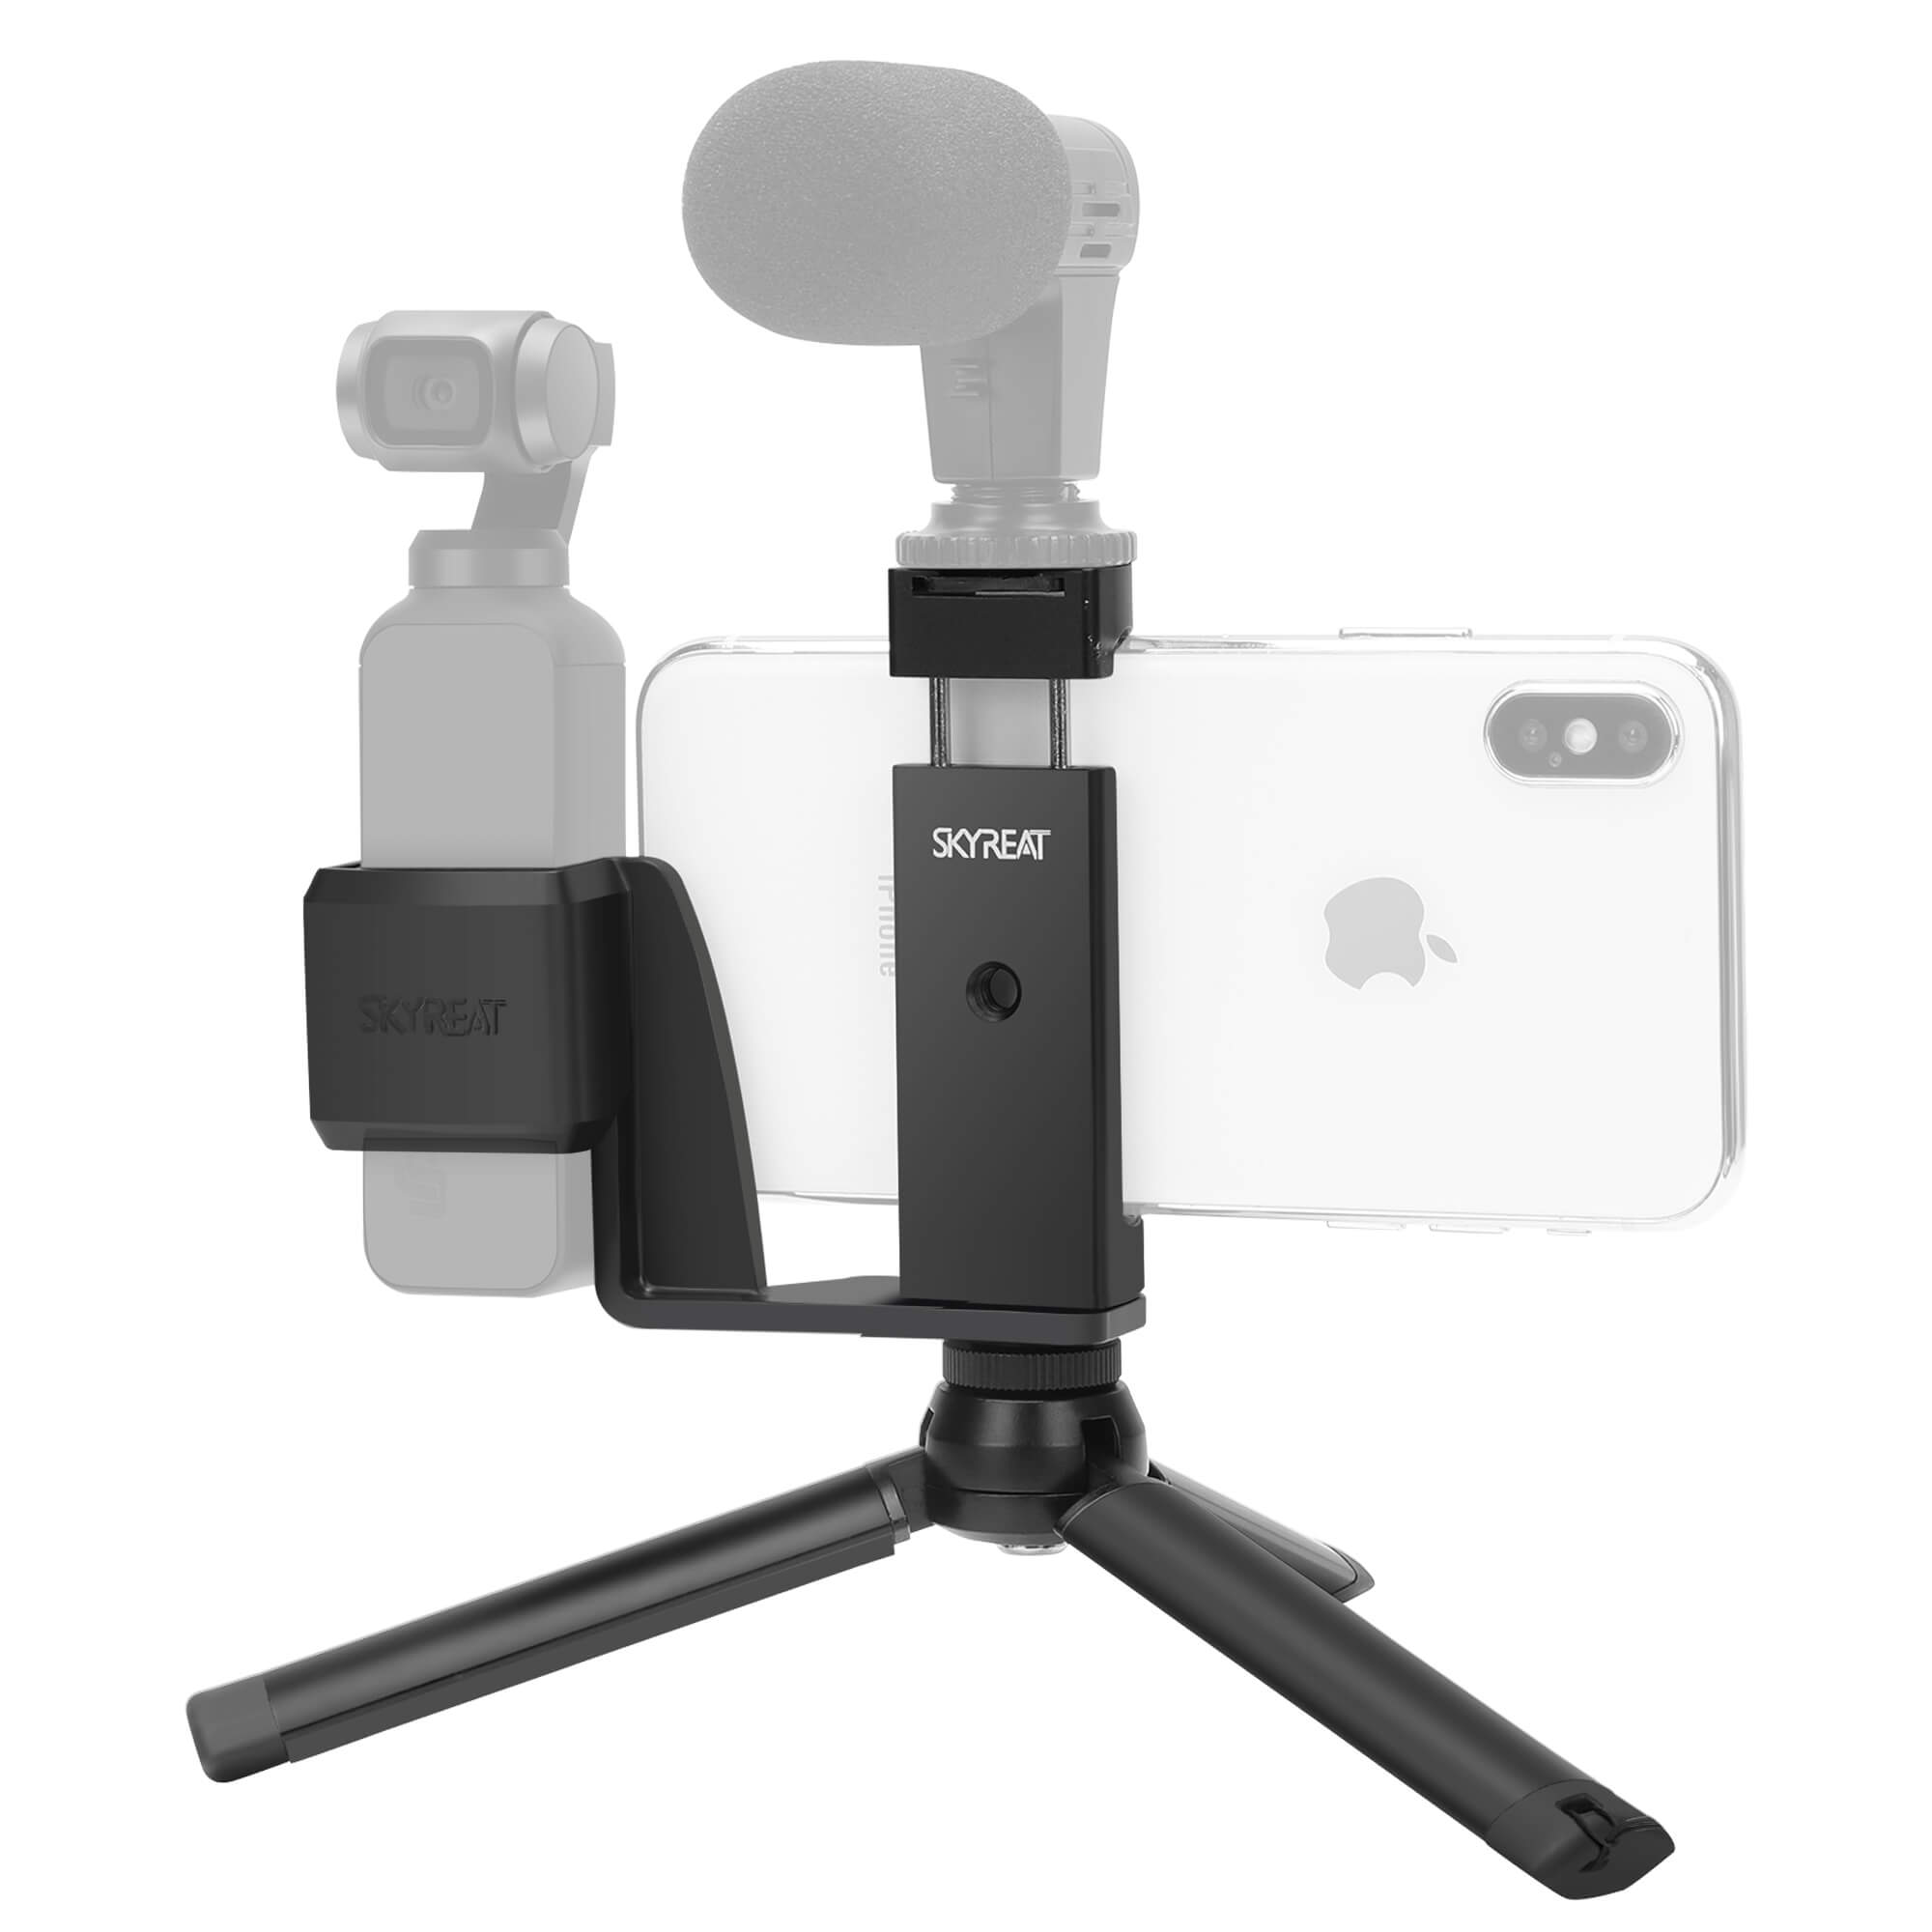 D&F Handheld Phone Holder Tripod Stand Mount with Expansion Holder for DJI Osmo Pocket 